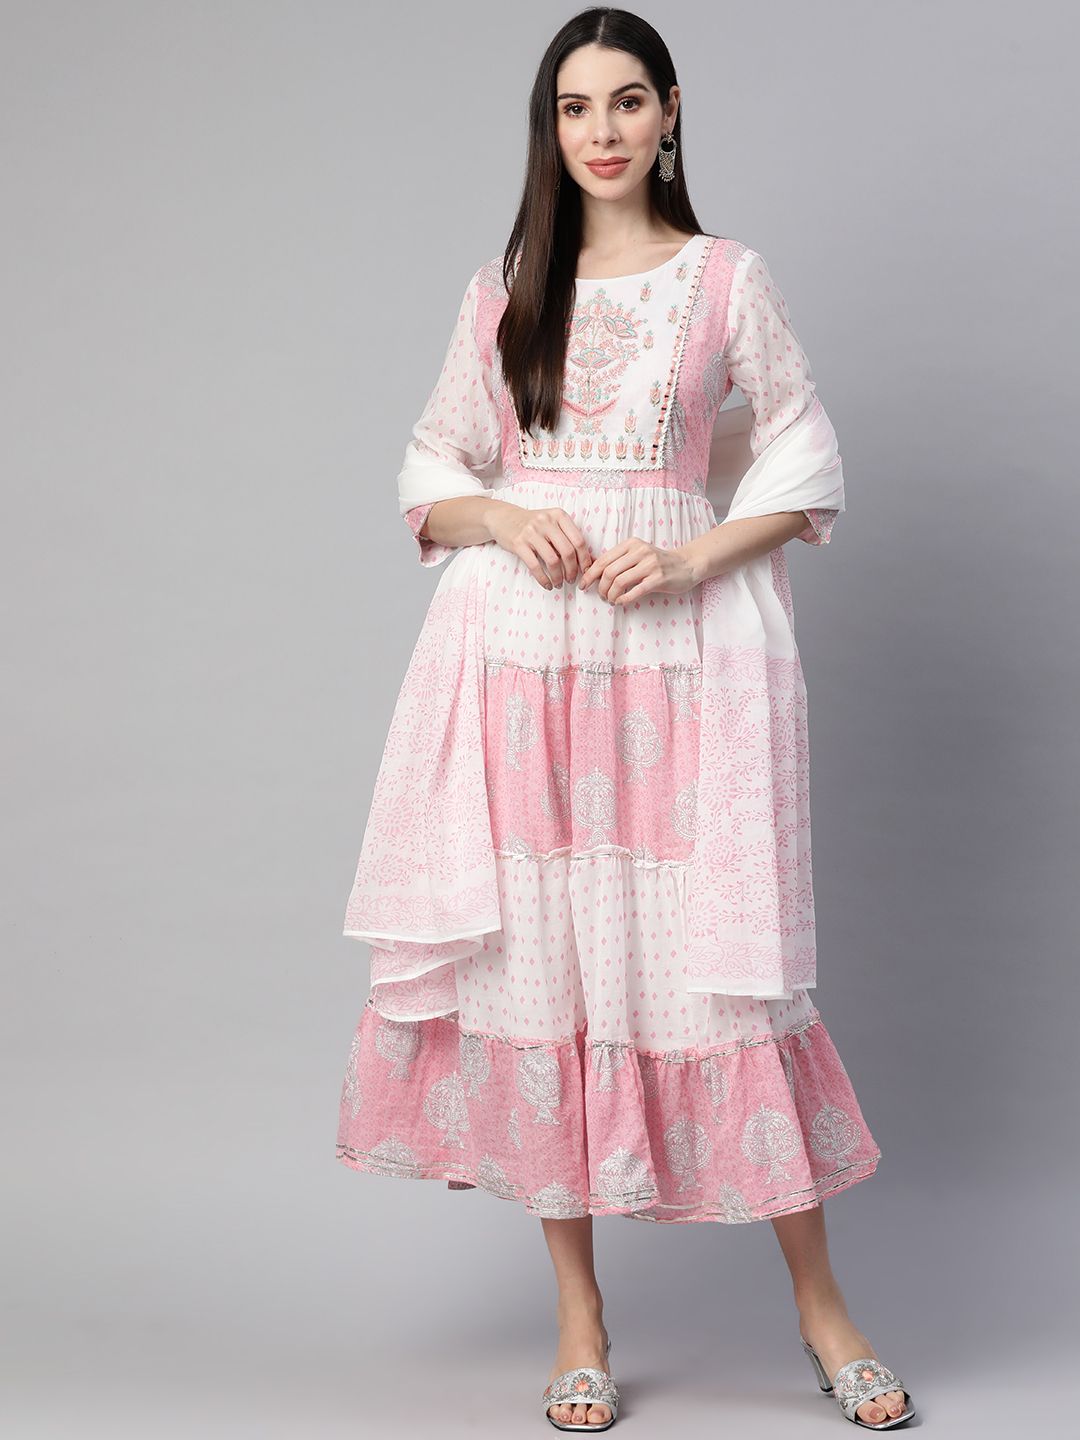 Readiprint Fashions Pink & White Pure Cotton Ethnic Motifs Ethnic Gown Price in India